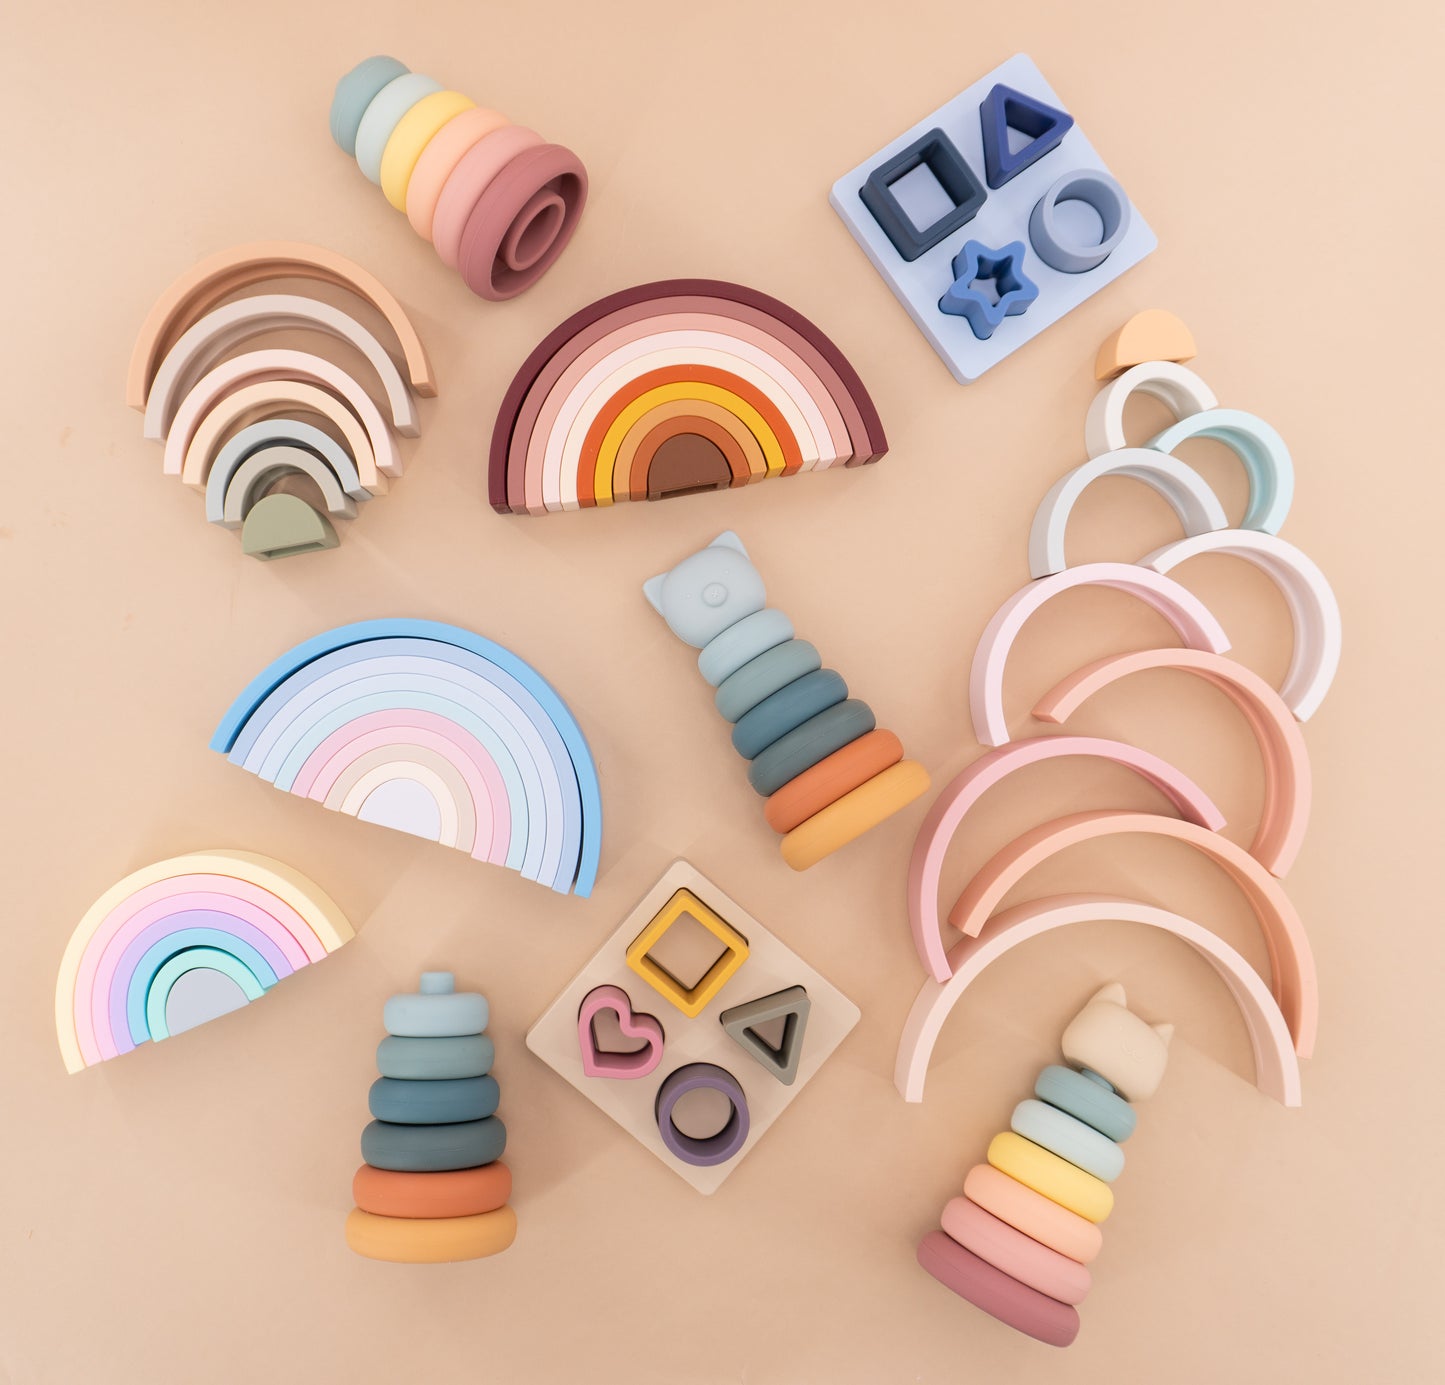 Silicone Stacking Toy & Teether - Forest